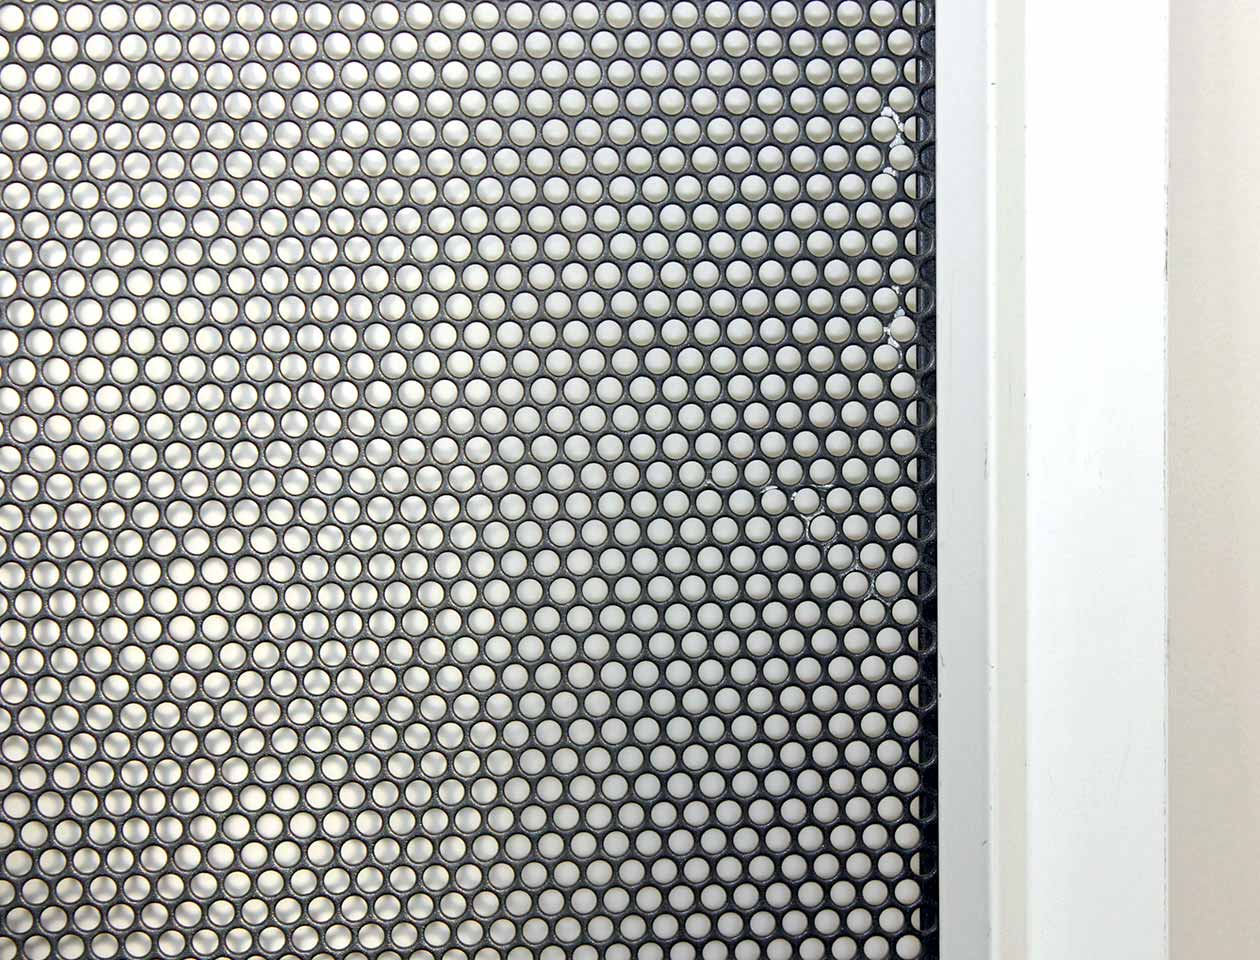 Seceuro mesh fixed security grilles